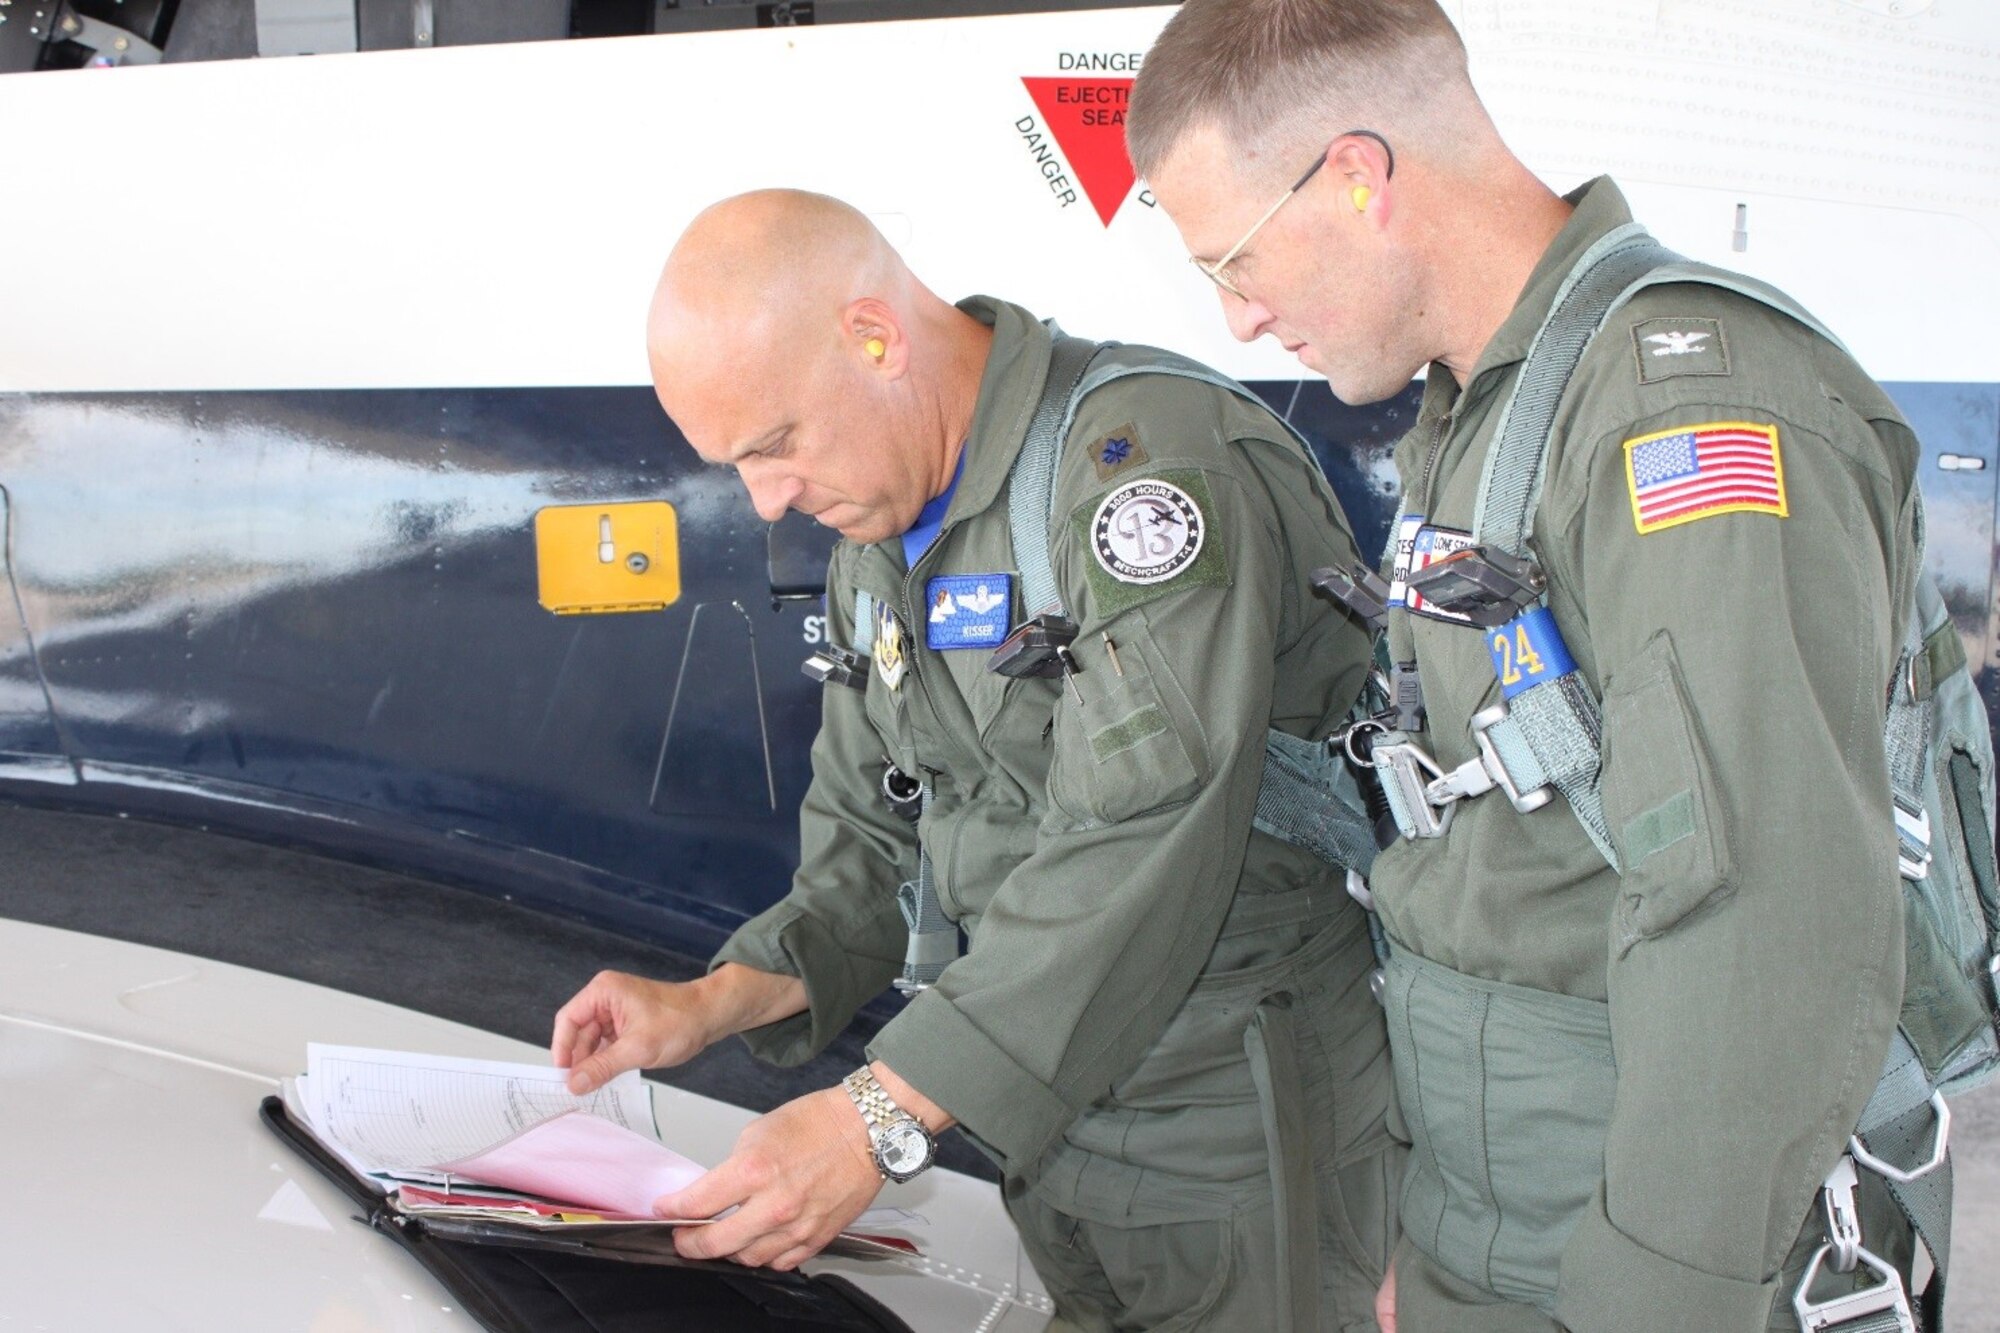 Lt. Col. Andrew Kissinger and U.S. Coast Guard Capt. Tony Hahn review their checklists before flying the T-6 Texan II. The USCG Corpus Christi sector commander/air station commanding officer reached out to the 39th Flying Training Squadron to discuss pilot retention/recruiting and reserve integration benefits. Closing out his visit, Kissinger took him on a familiarization flight. (Photo by Debbie Gildea, 340th Flying Training Group Public Affairs).